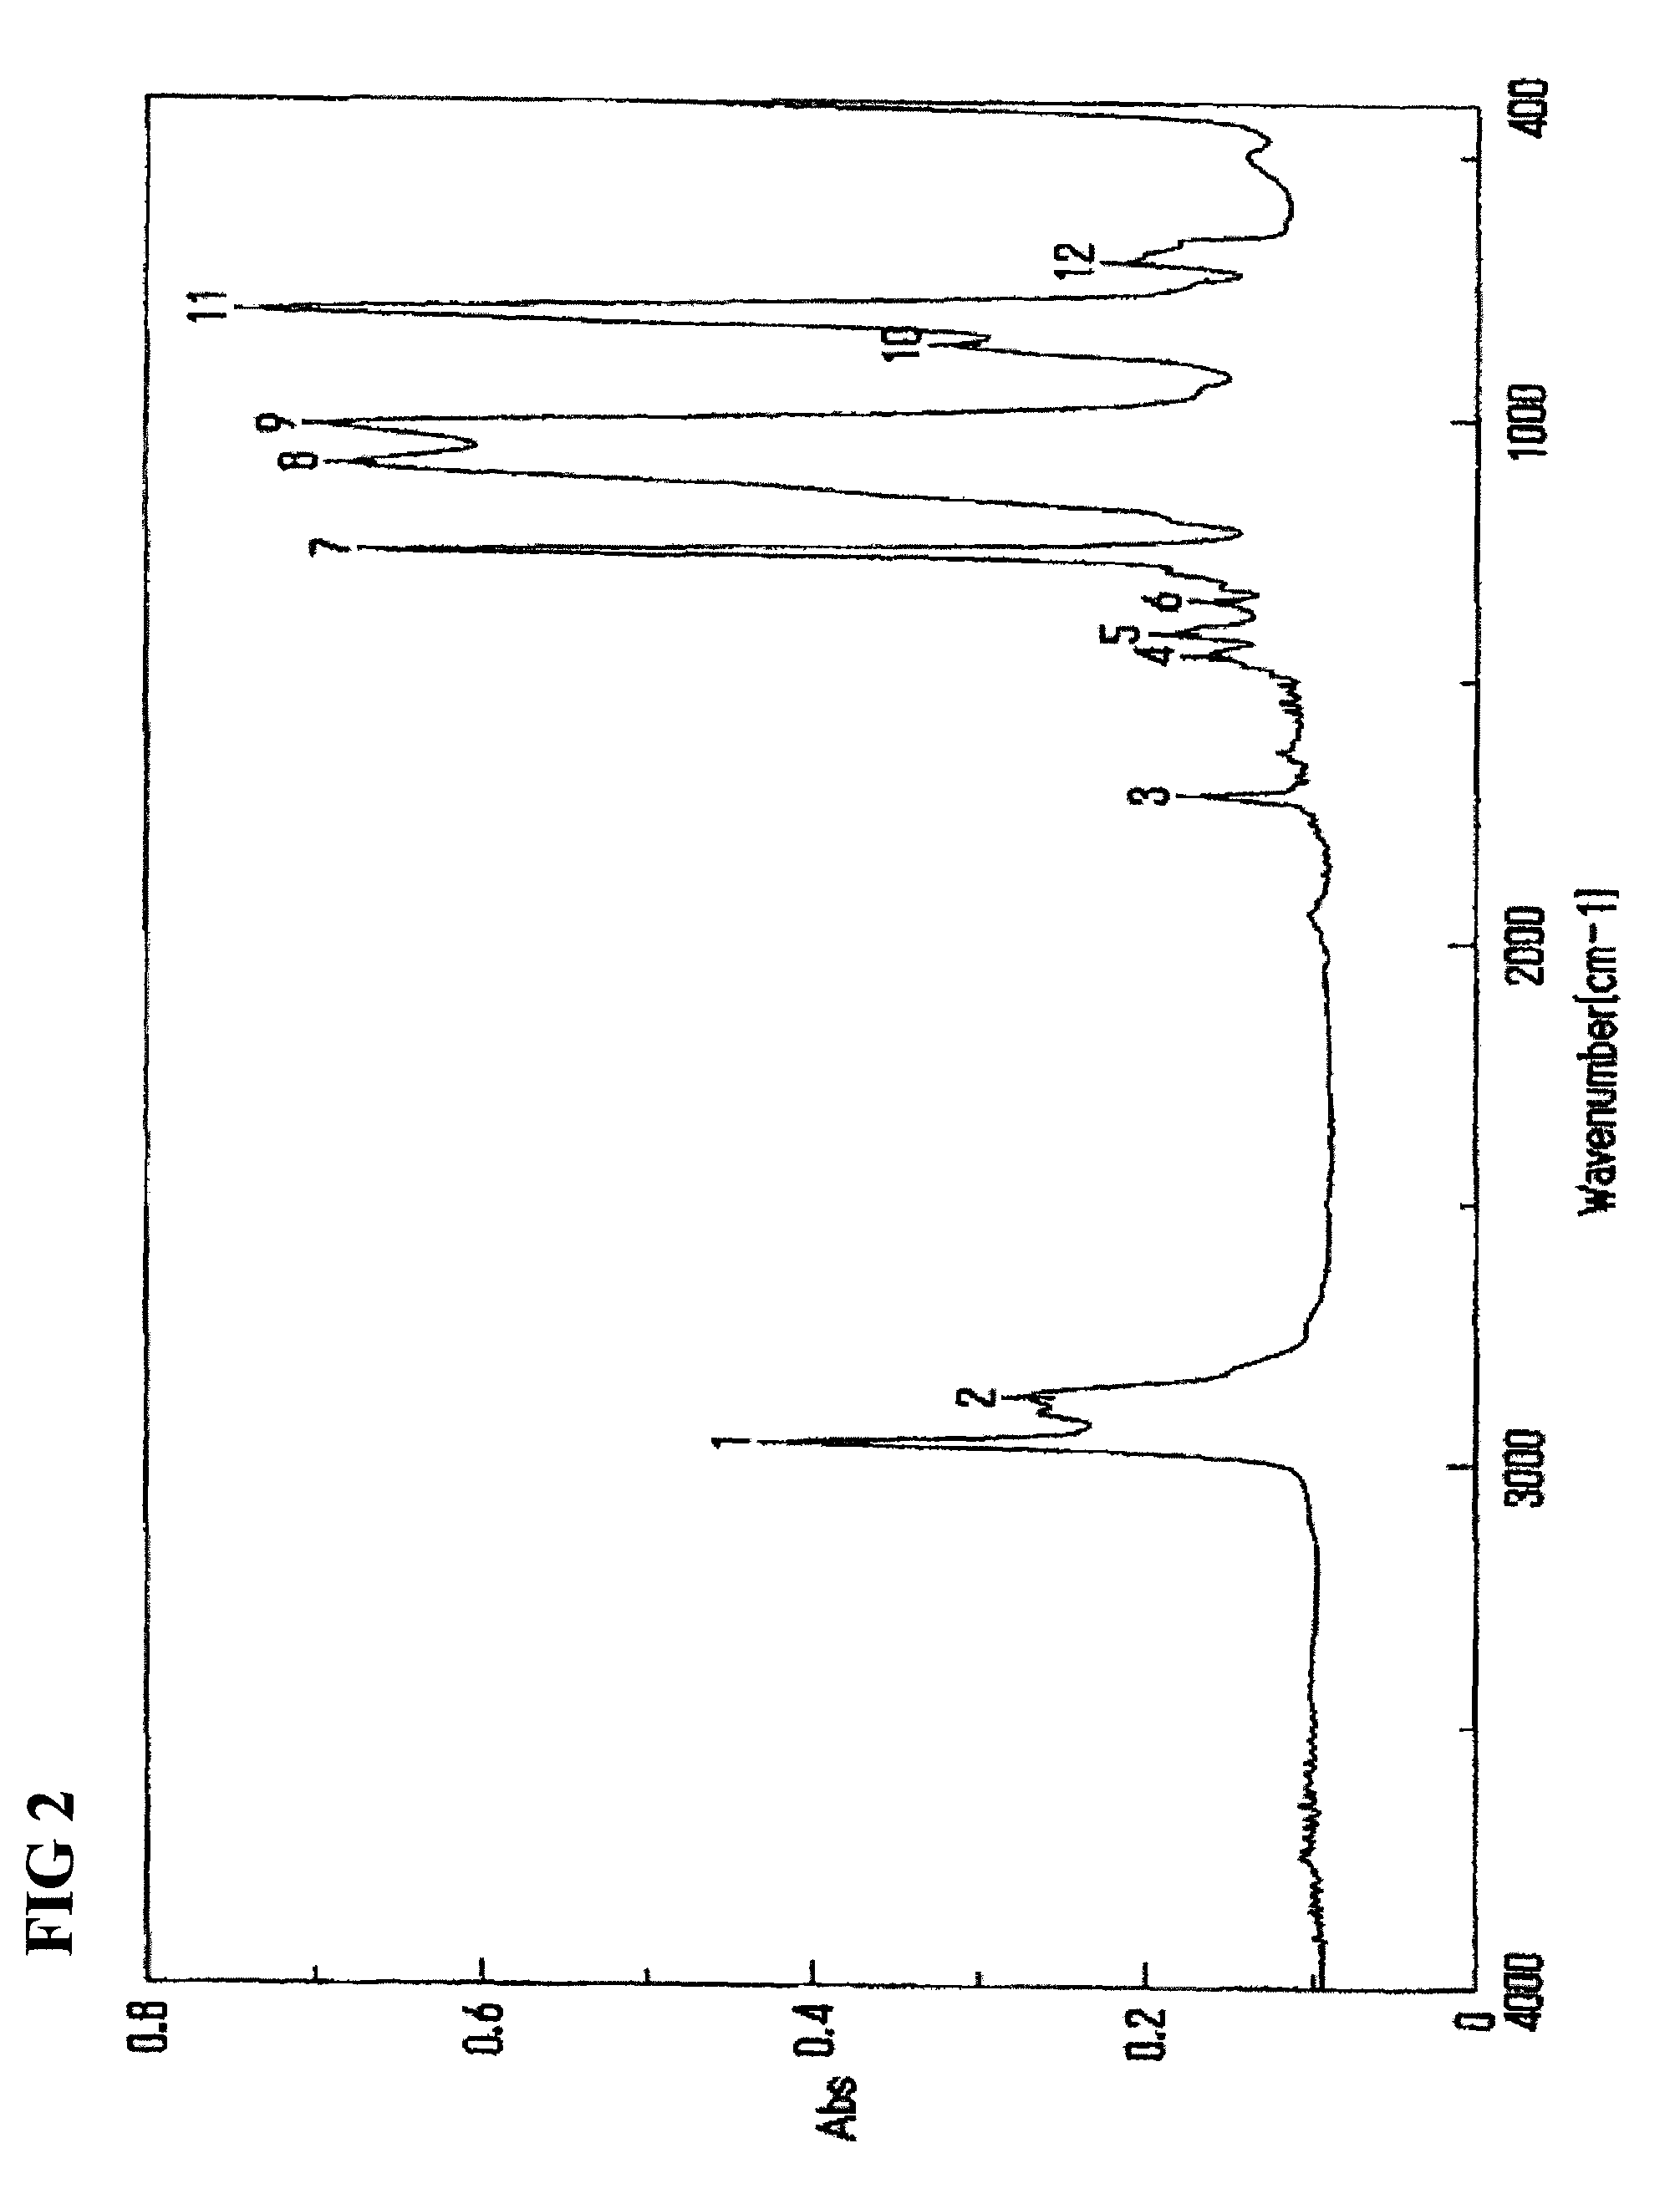 Hydrophilic polysiloxane macromonomer, and production and use of the same